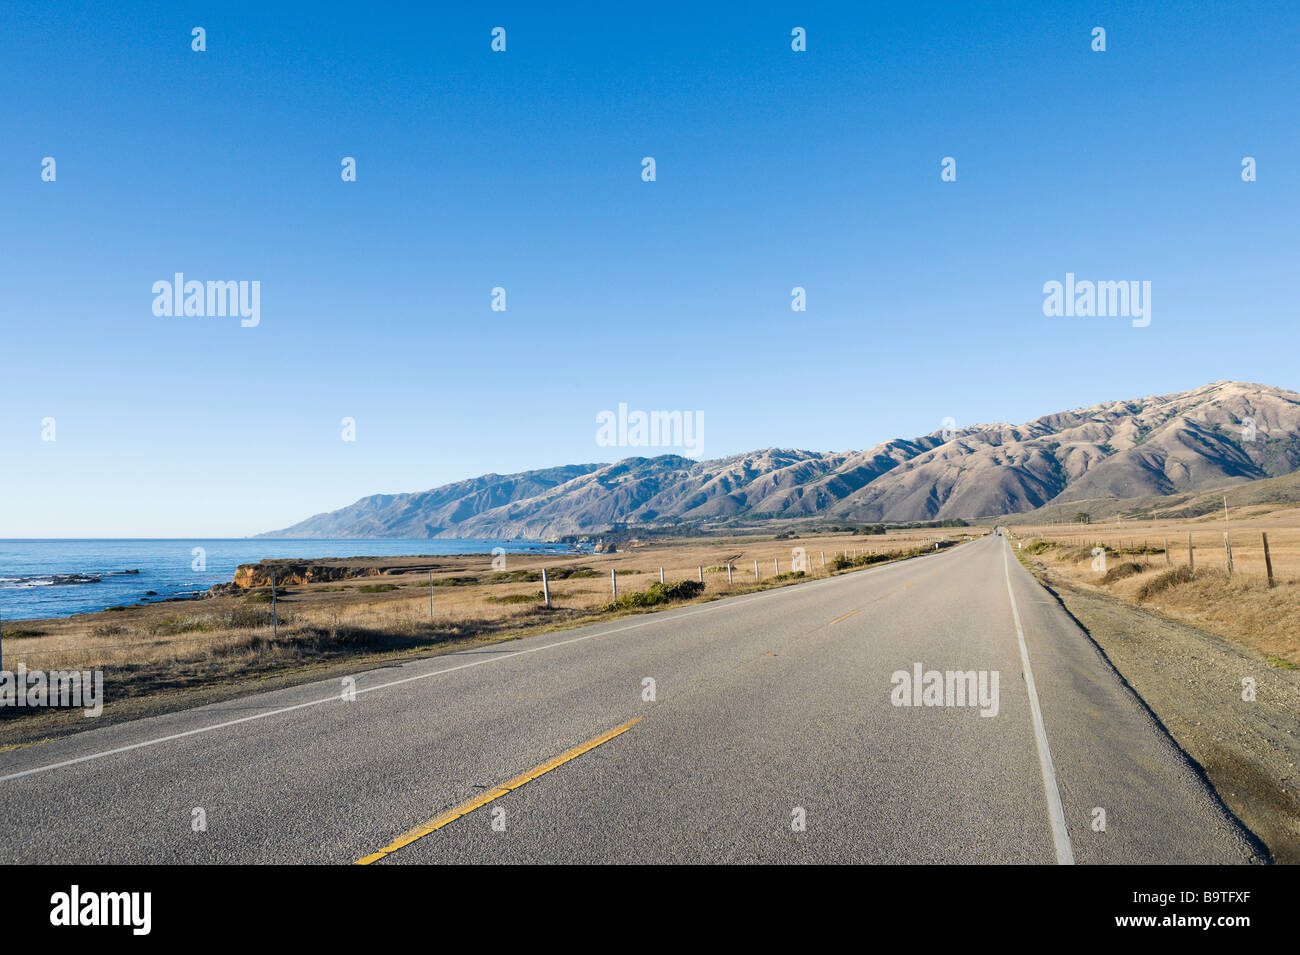 The Pacific Coast Highway or Cabrillo Highway (Highway 1) just south of the Santa Lucia Mountains, Central California, USA Stock Photo